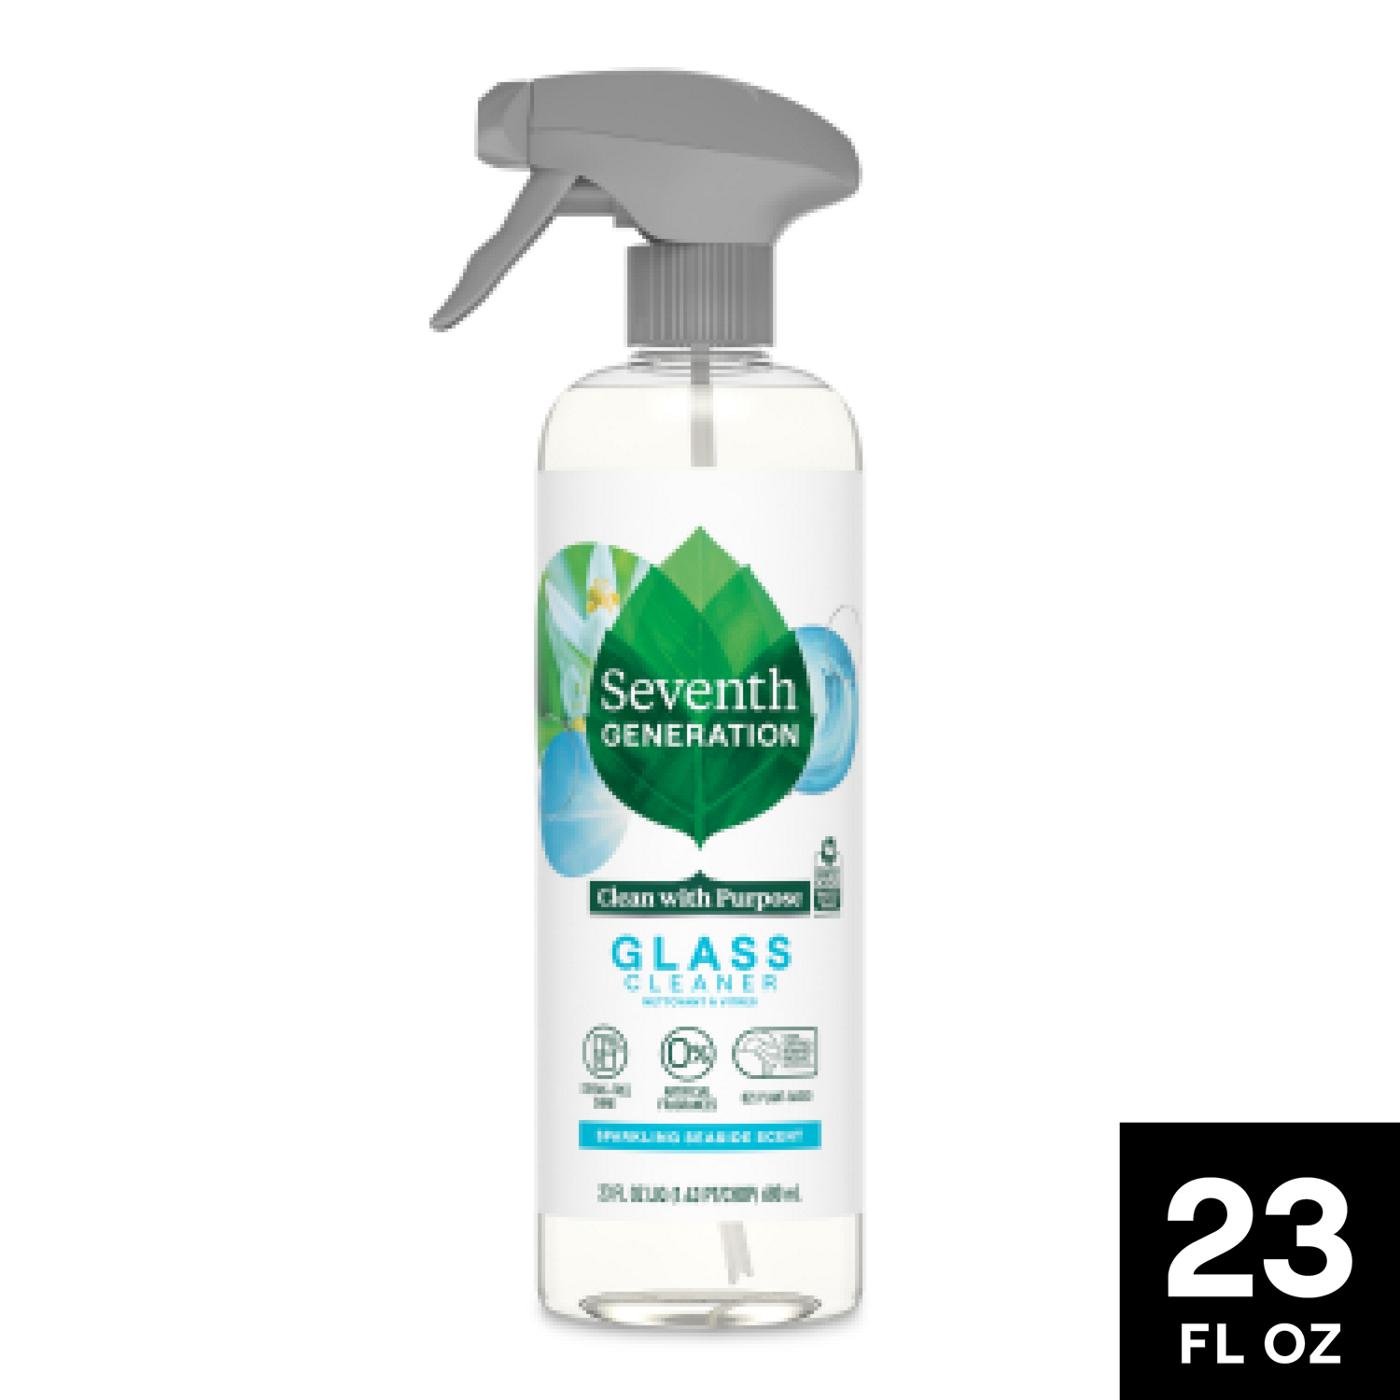 Seventh Generation Sparkling Seaside Glass Cleaner Spray; image 2 of 8